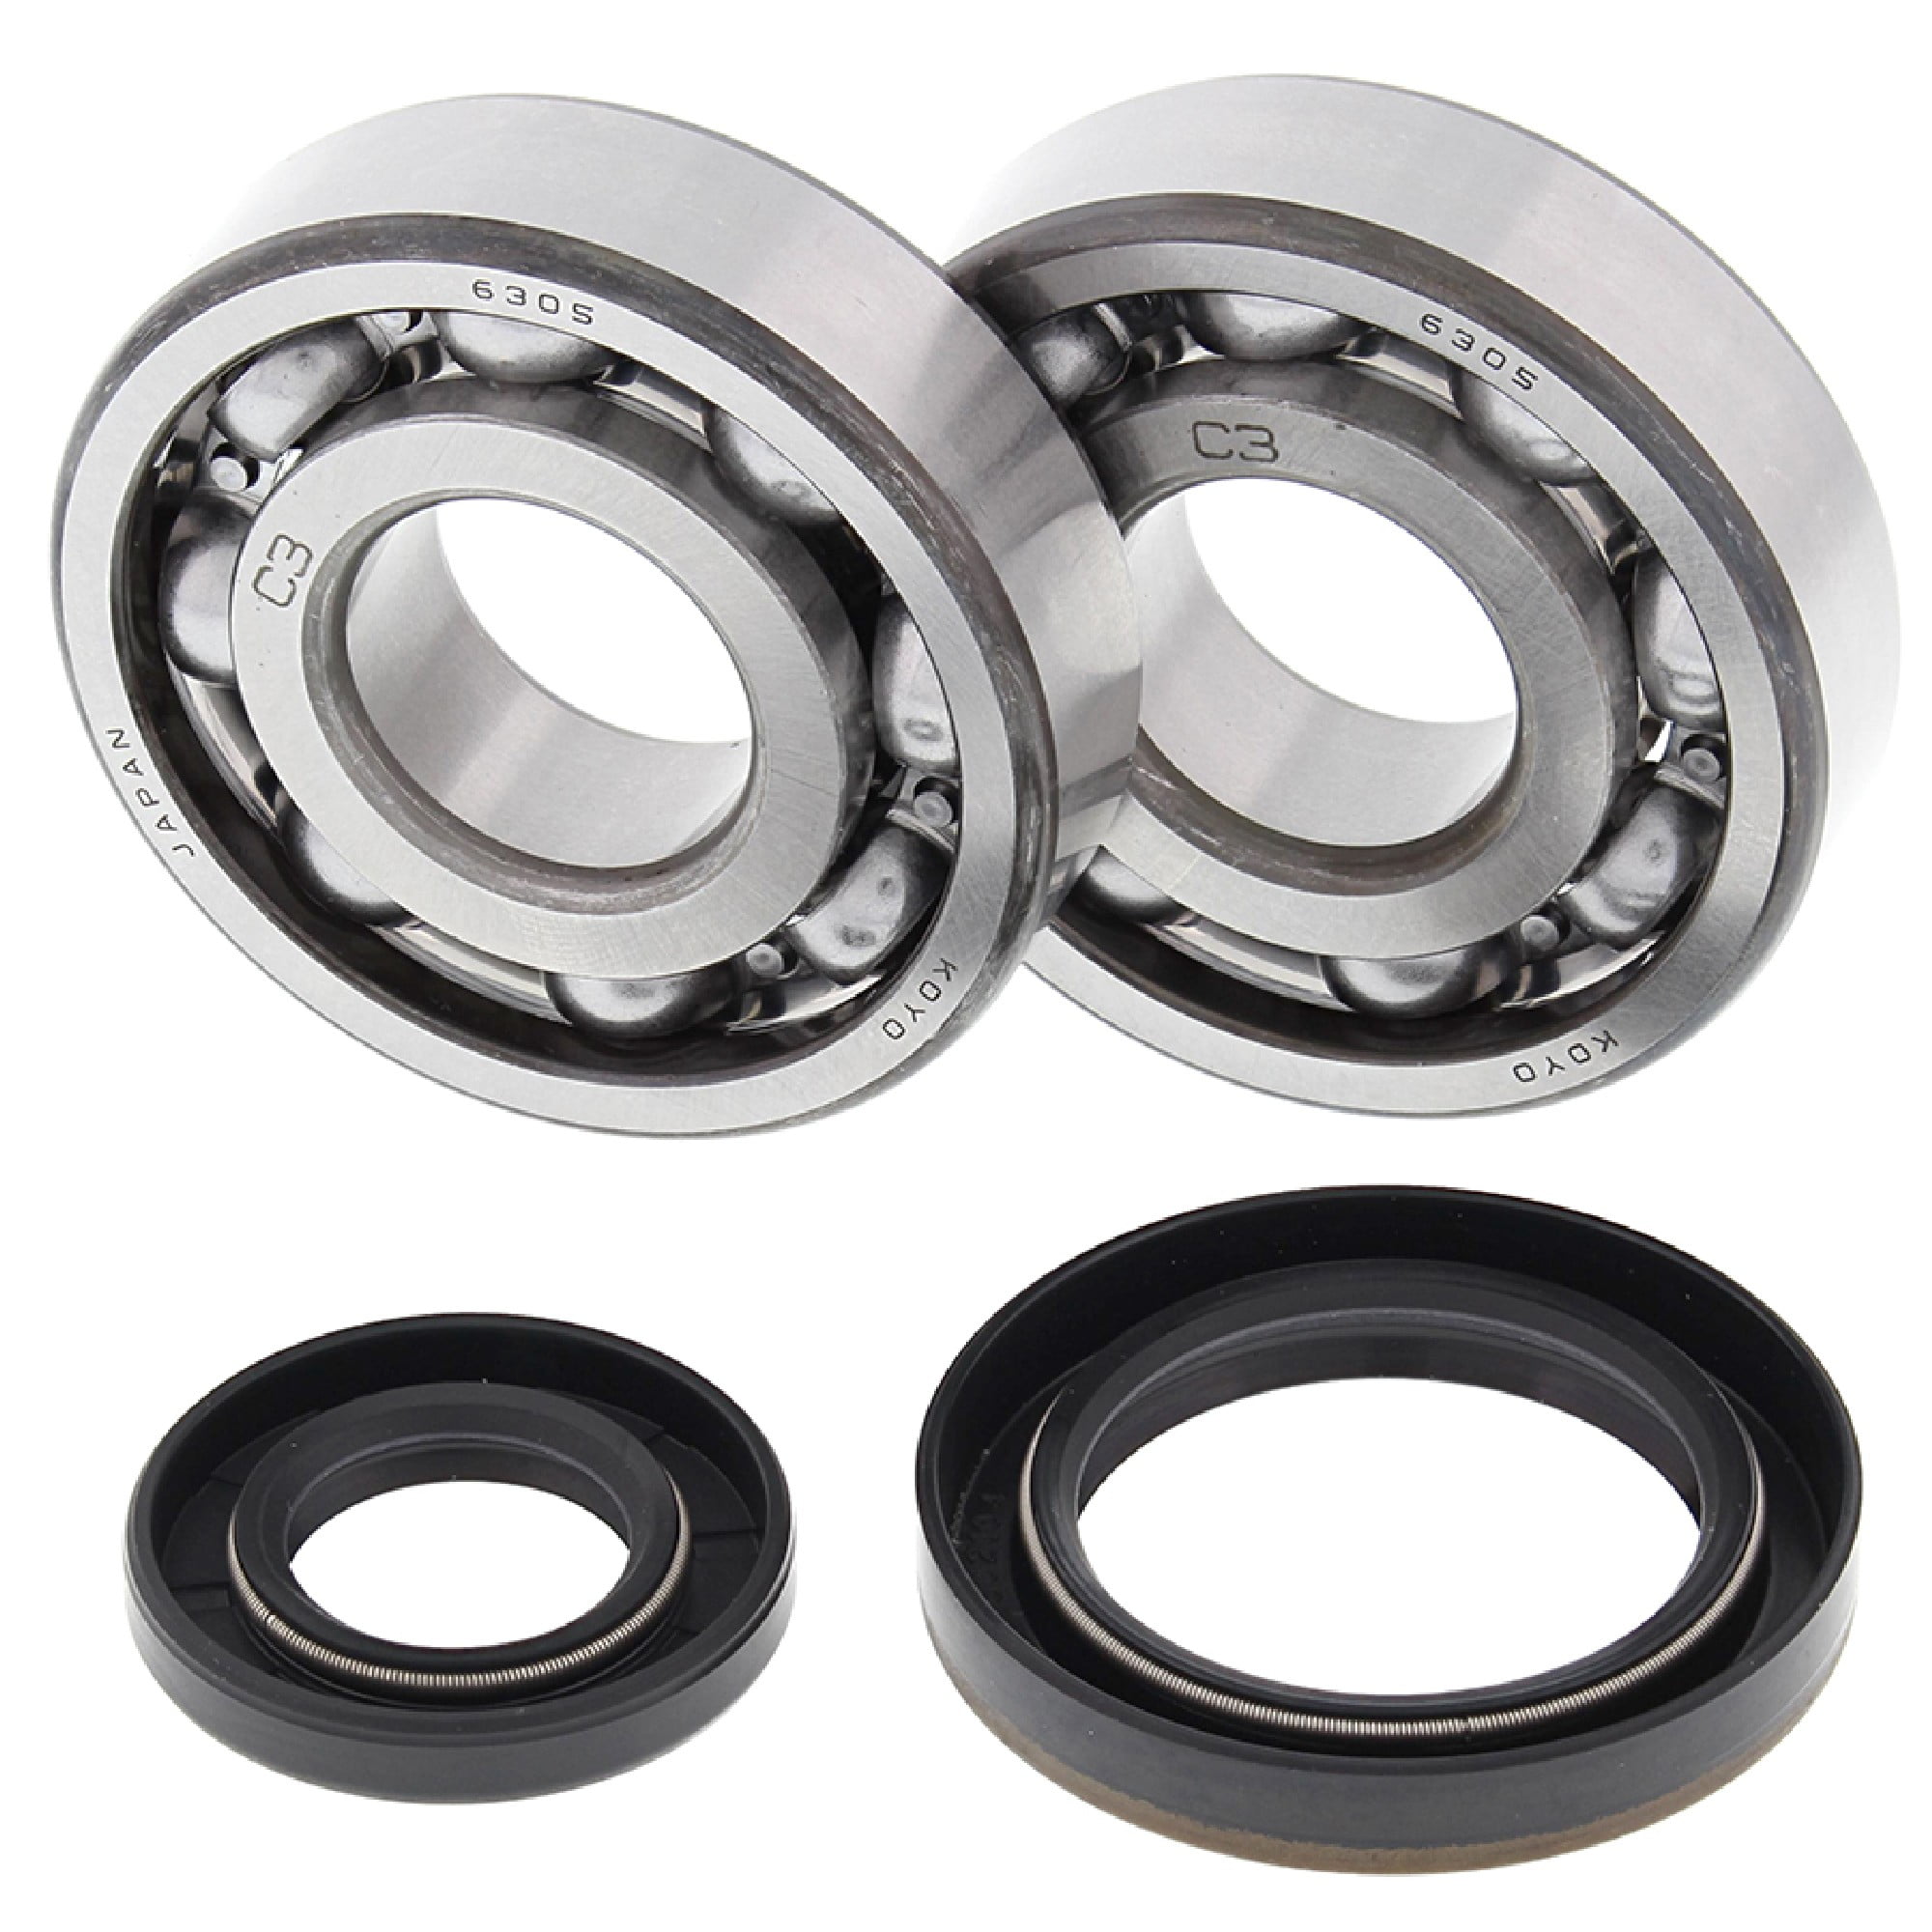 New All Balls Racing Crank Bearing and Seal Kit 24-1019 Compatible With/ Replacement For Suzuki RM 250 1989 1990 1991 1992 1993